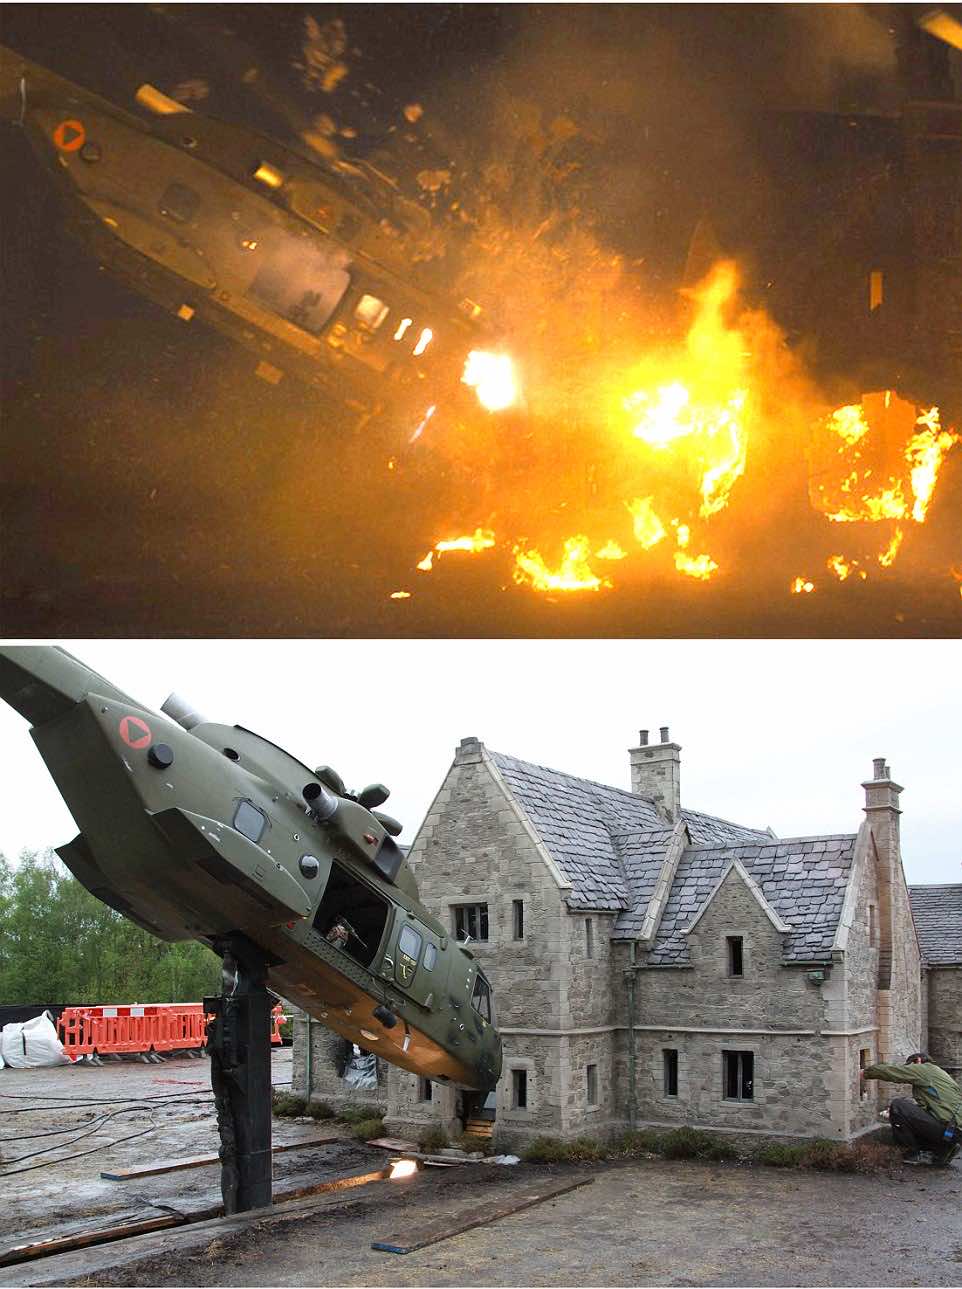 Skyfall (2012) - Skyfall Lodge - the childhood home of James Bond is seen in model form (see man on right for scale during filming) before explosively attacked by enemy helicopter.